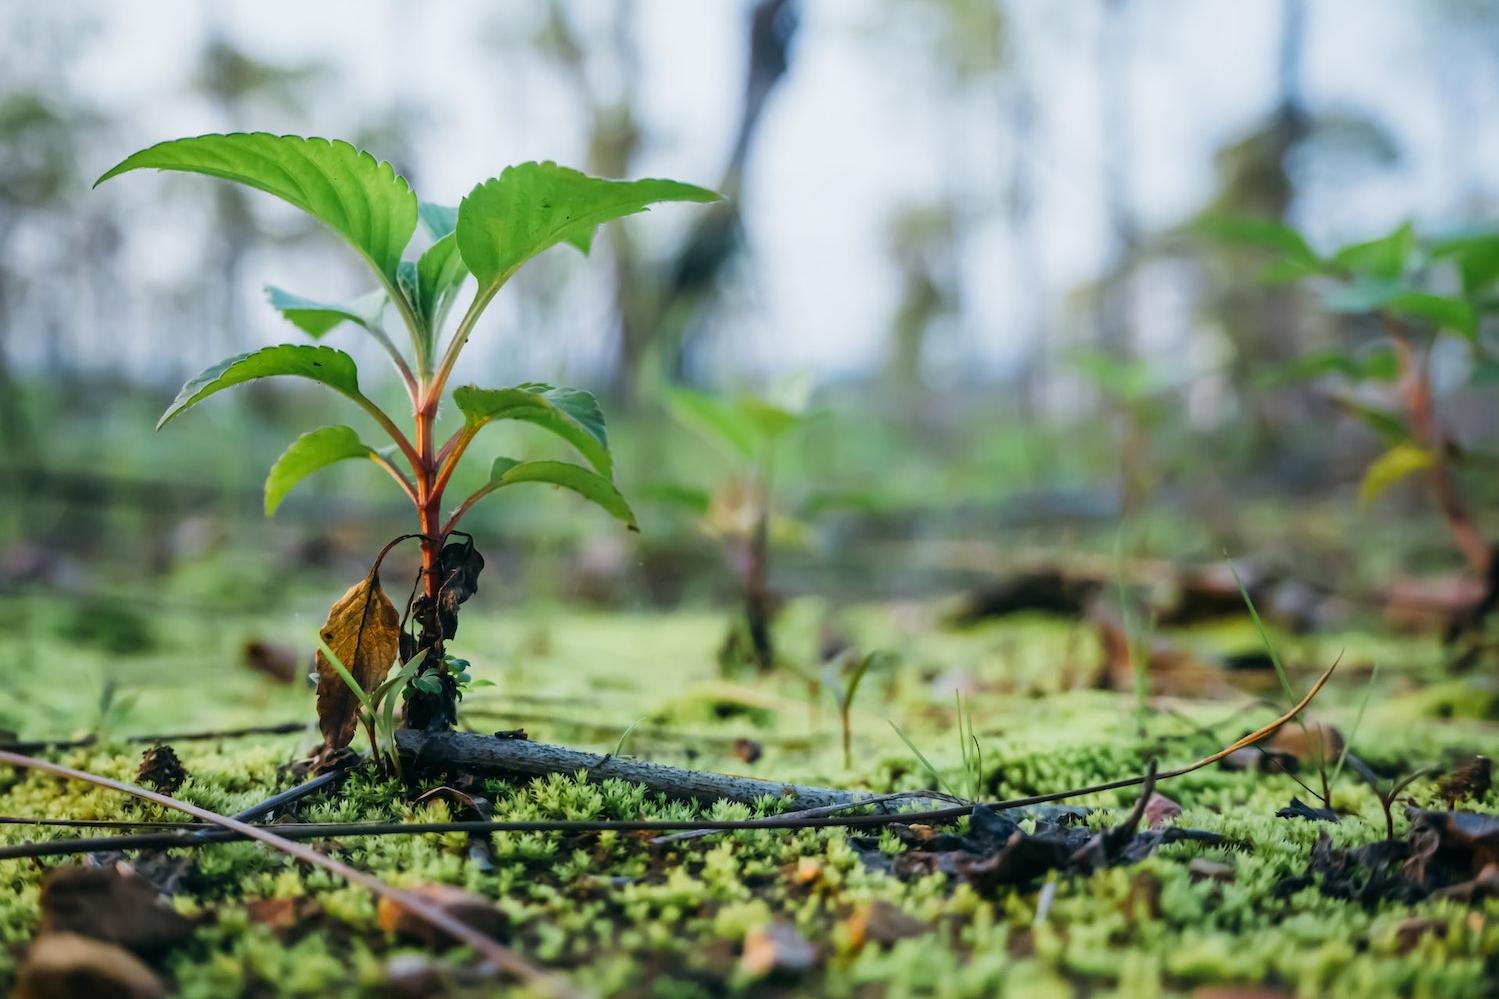 new baby tree grows in forest - tree planting - carbon credits - carbon markets